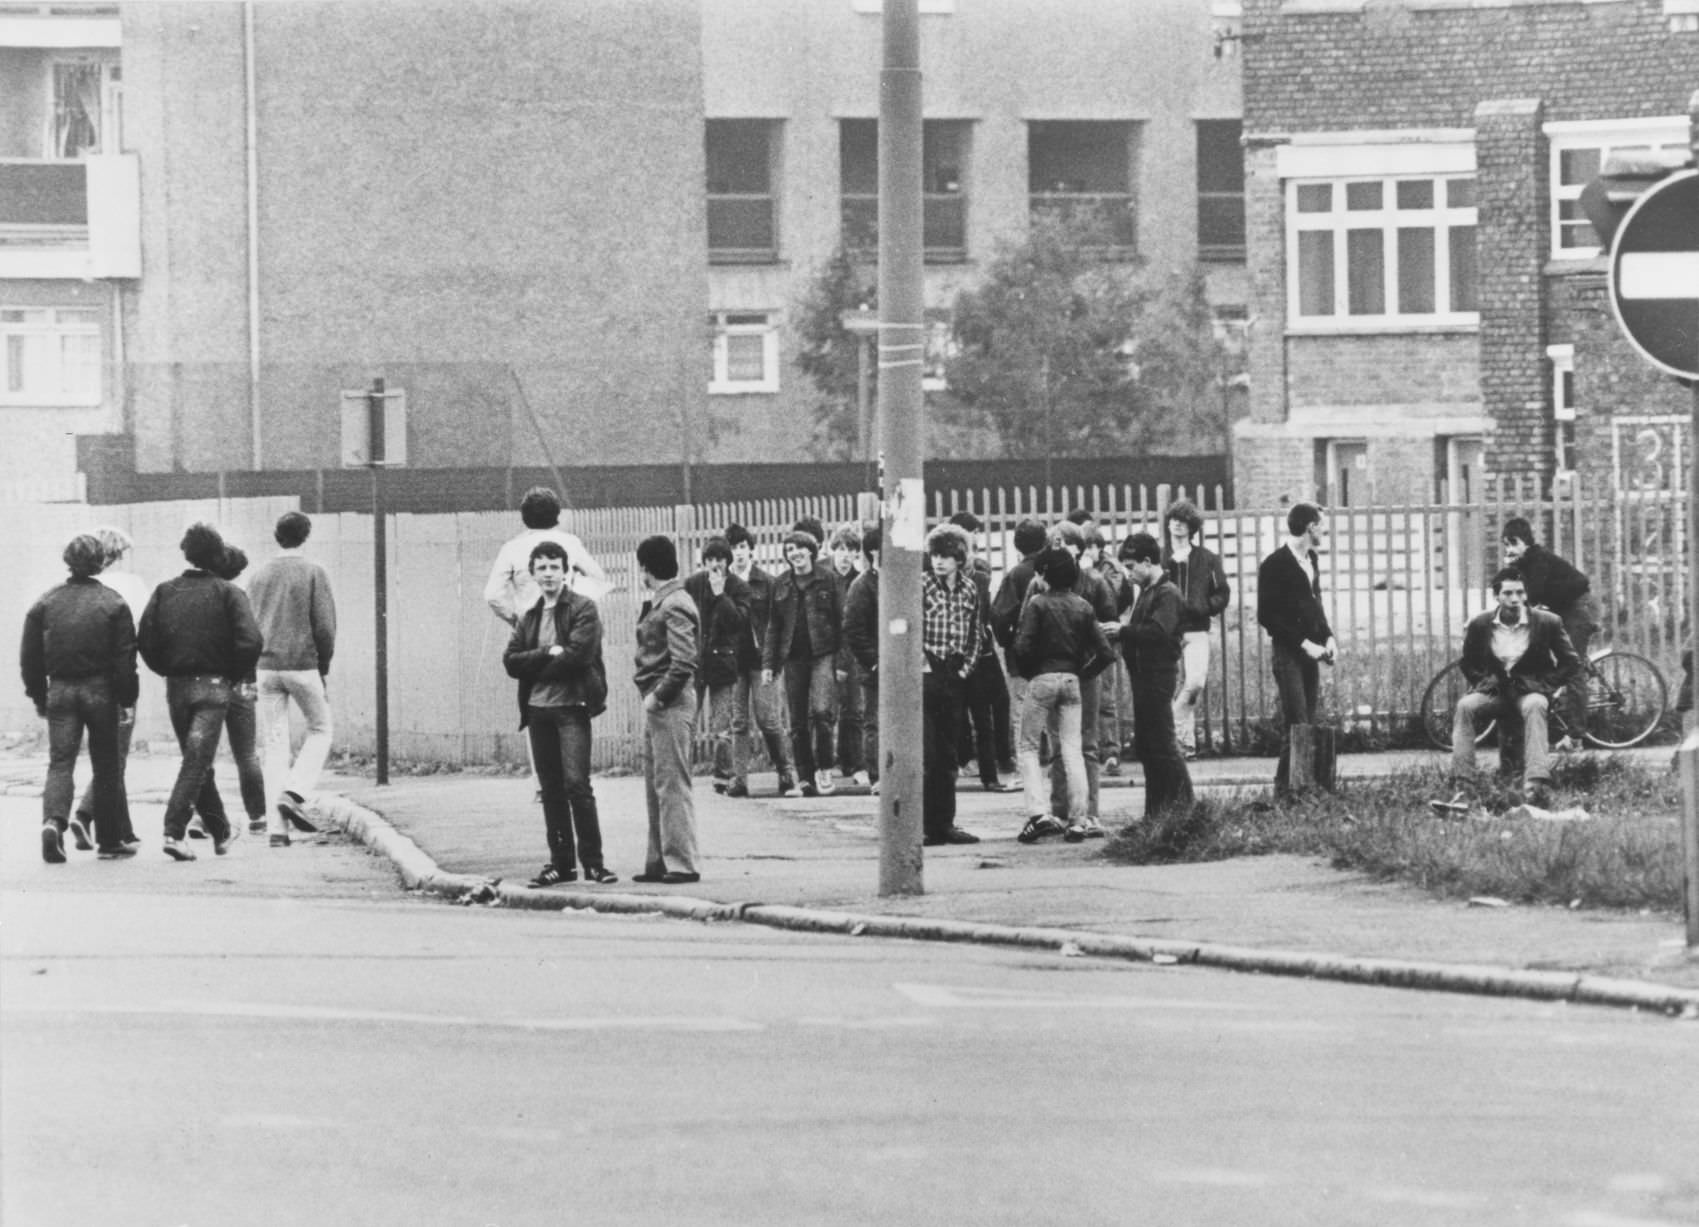 A crowd of youths standing on a street corner before rioting started in the Toxteth area of Liverpool, England, July 1981